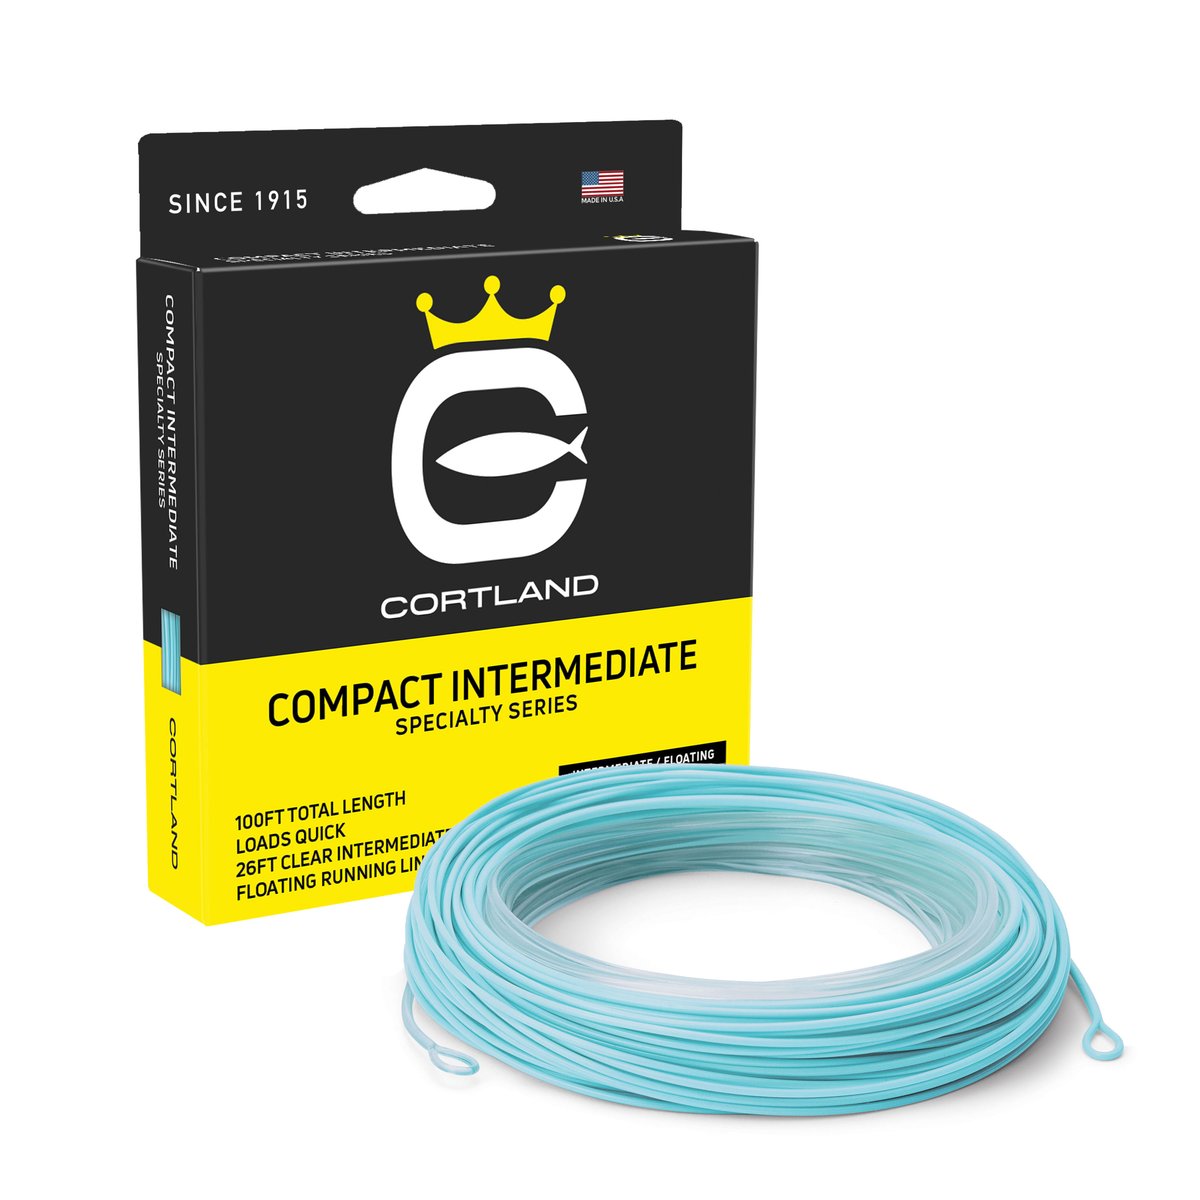 Cortland - Saltwater Specialty Series - Compact Intermediate Fly Line